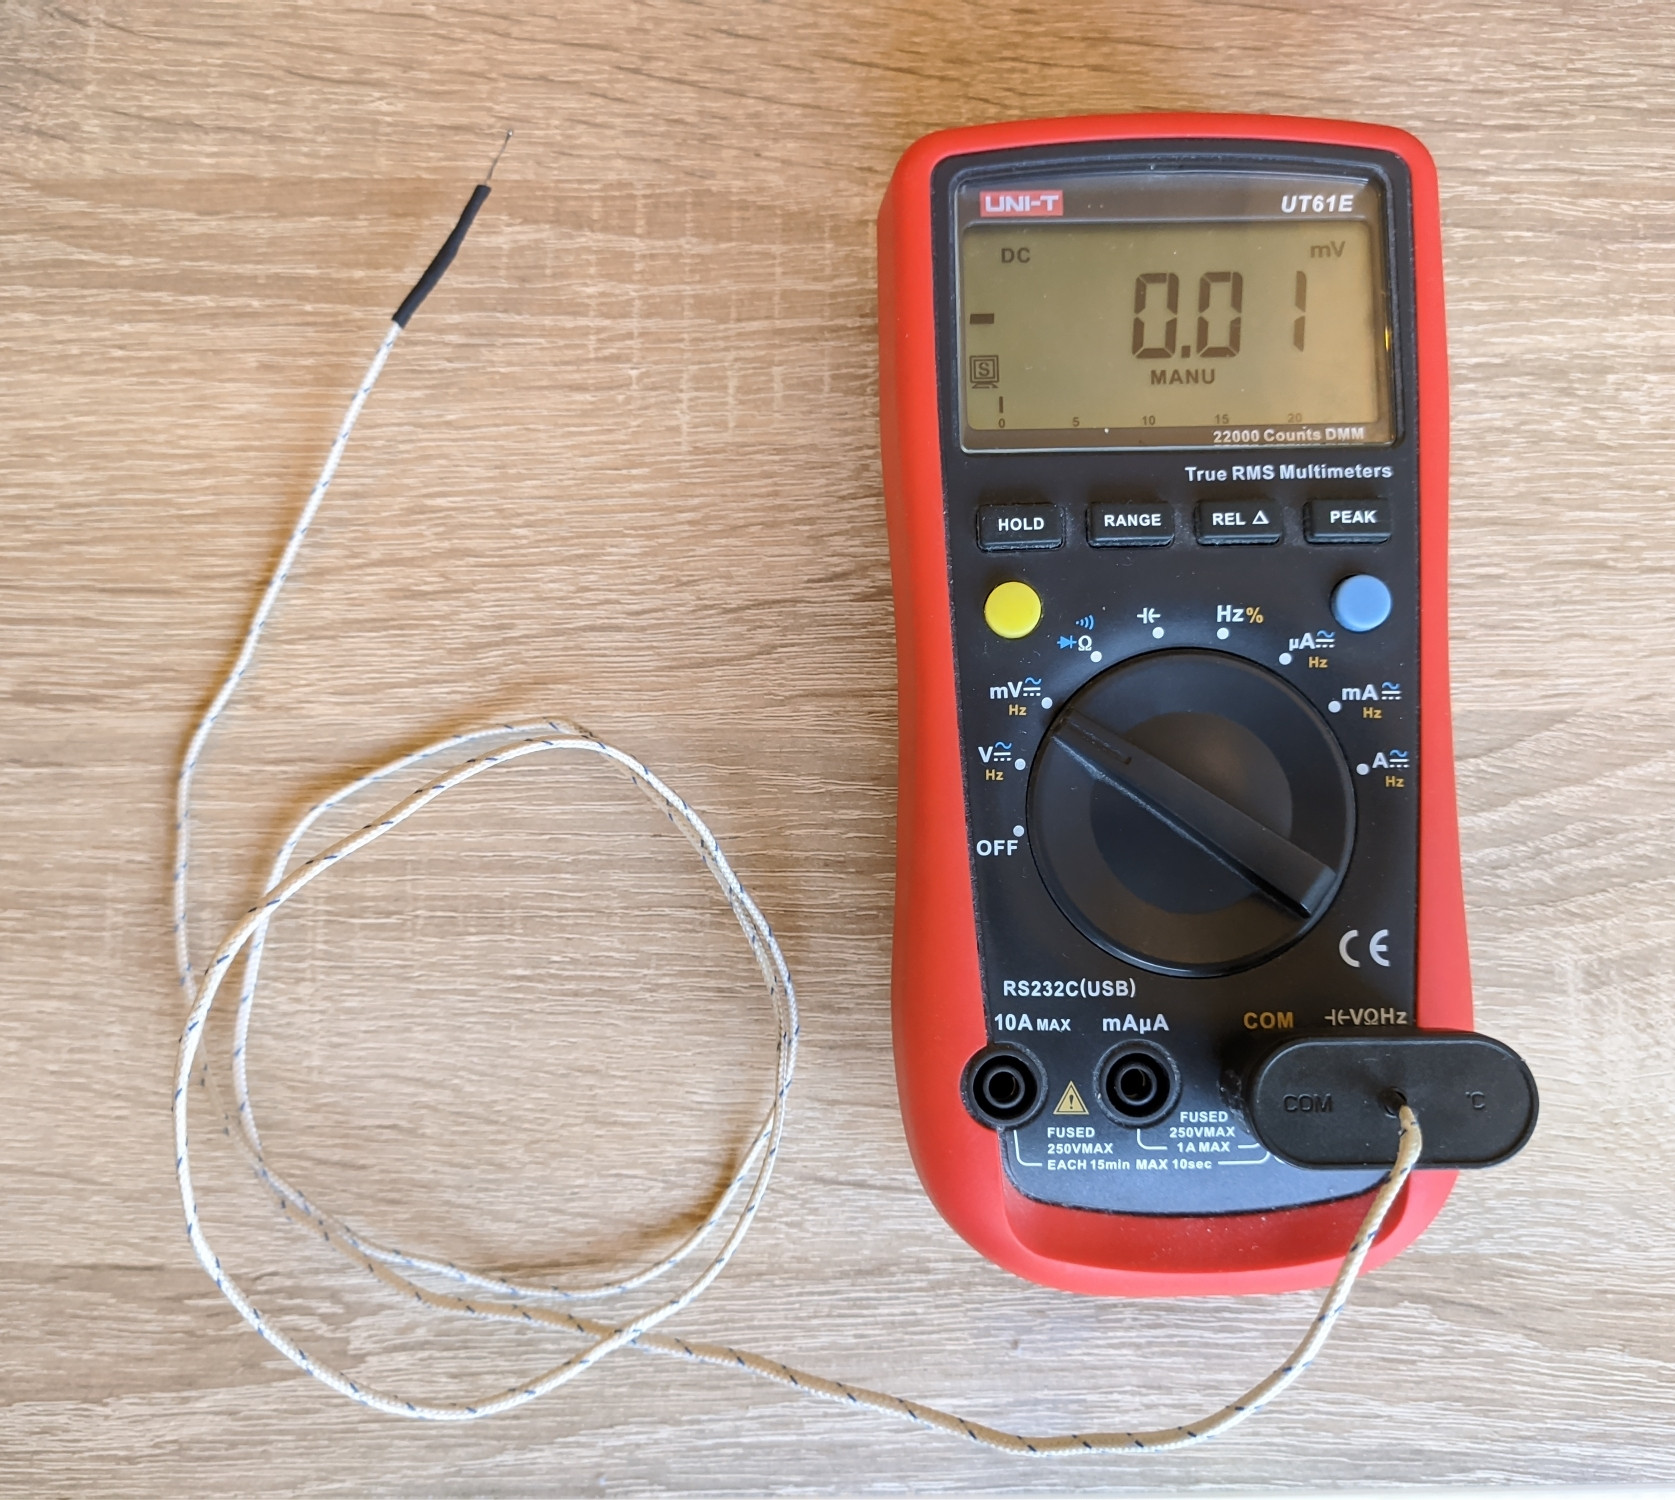 UT61E with thermocouple plugged in